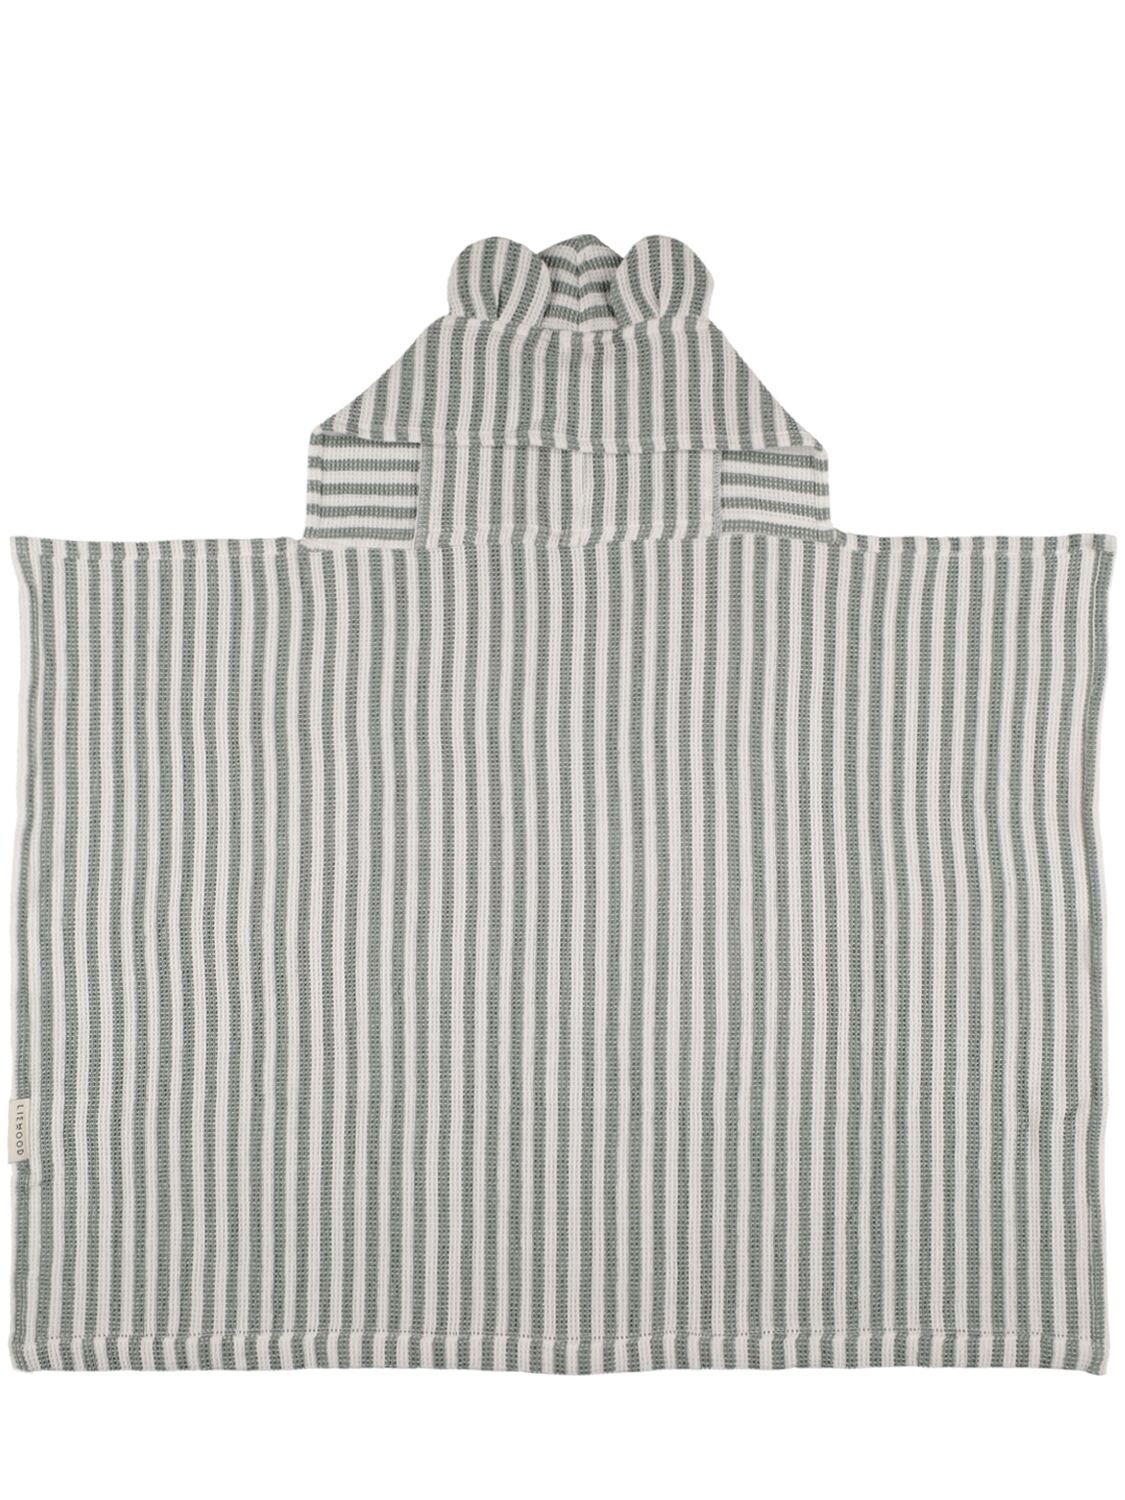 Image of Organic Cotton Hooded Towel